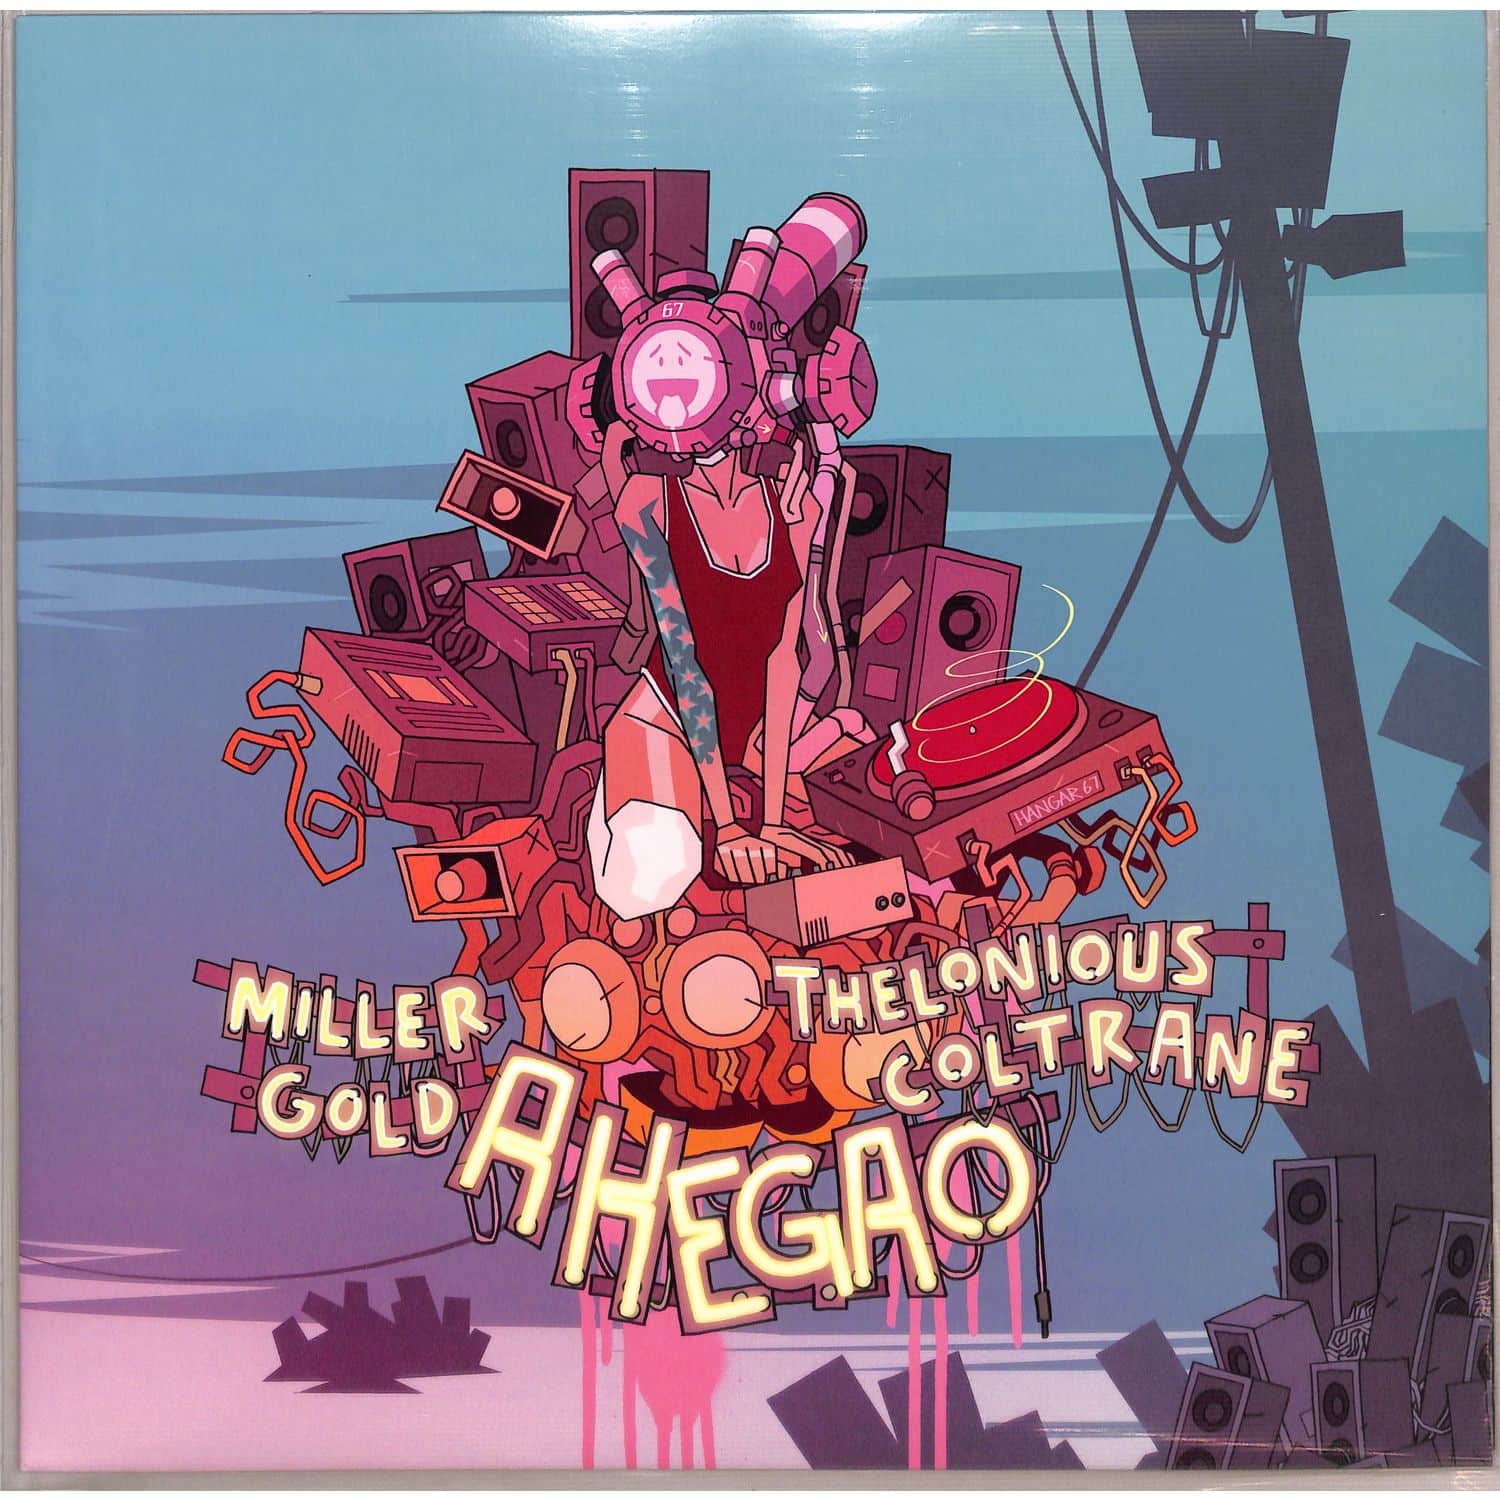 Thelonious Coltrane x Miller Gold - AHEGAO 